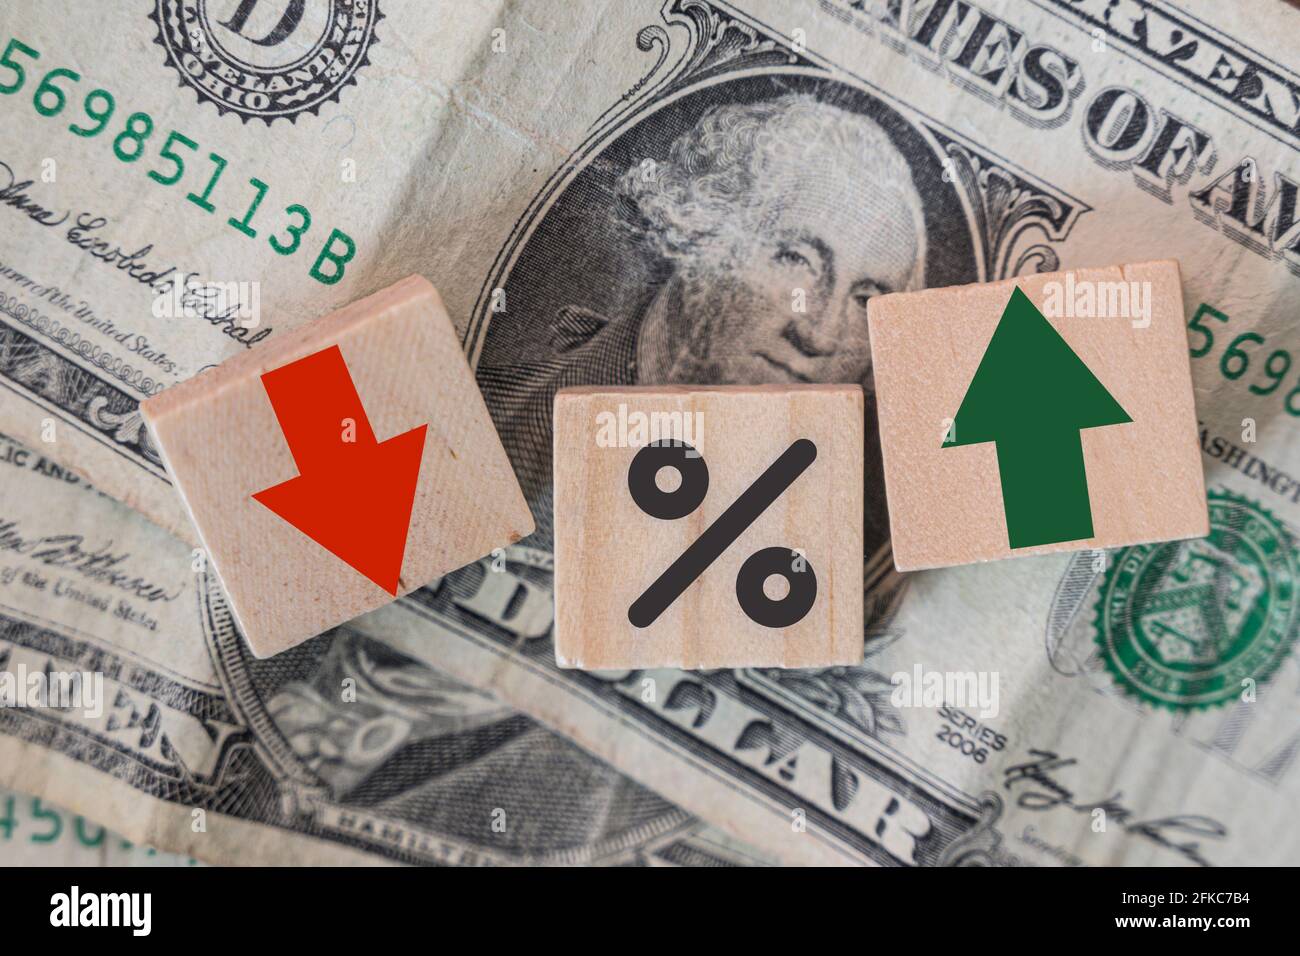 Interest rates,tax, trading, business, financial concept. Percentage icon and arrow symbol on wooden cubes isolated on dollar banknote background Stock Photo